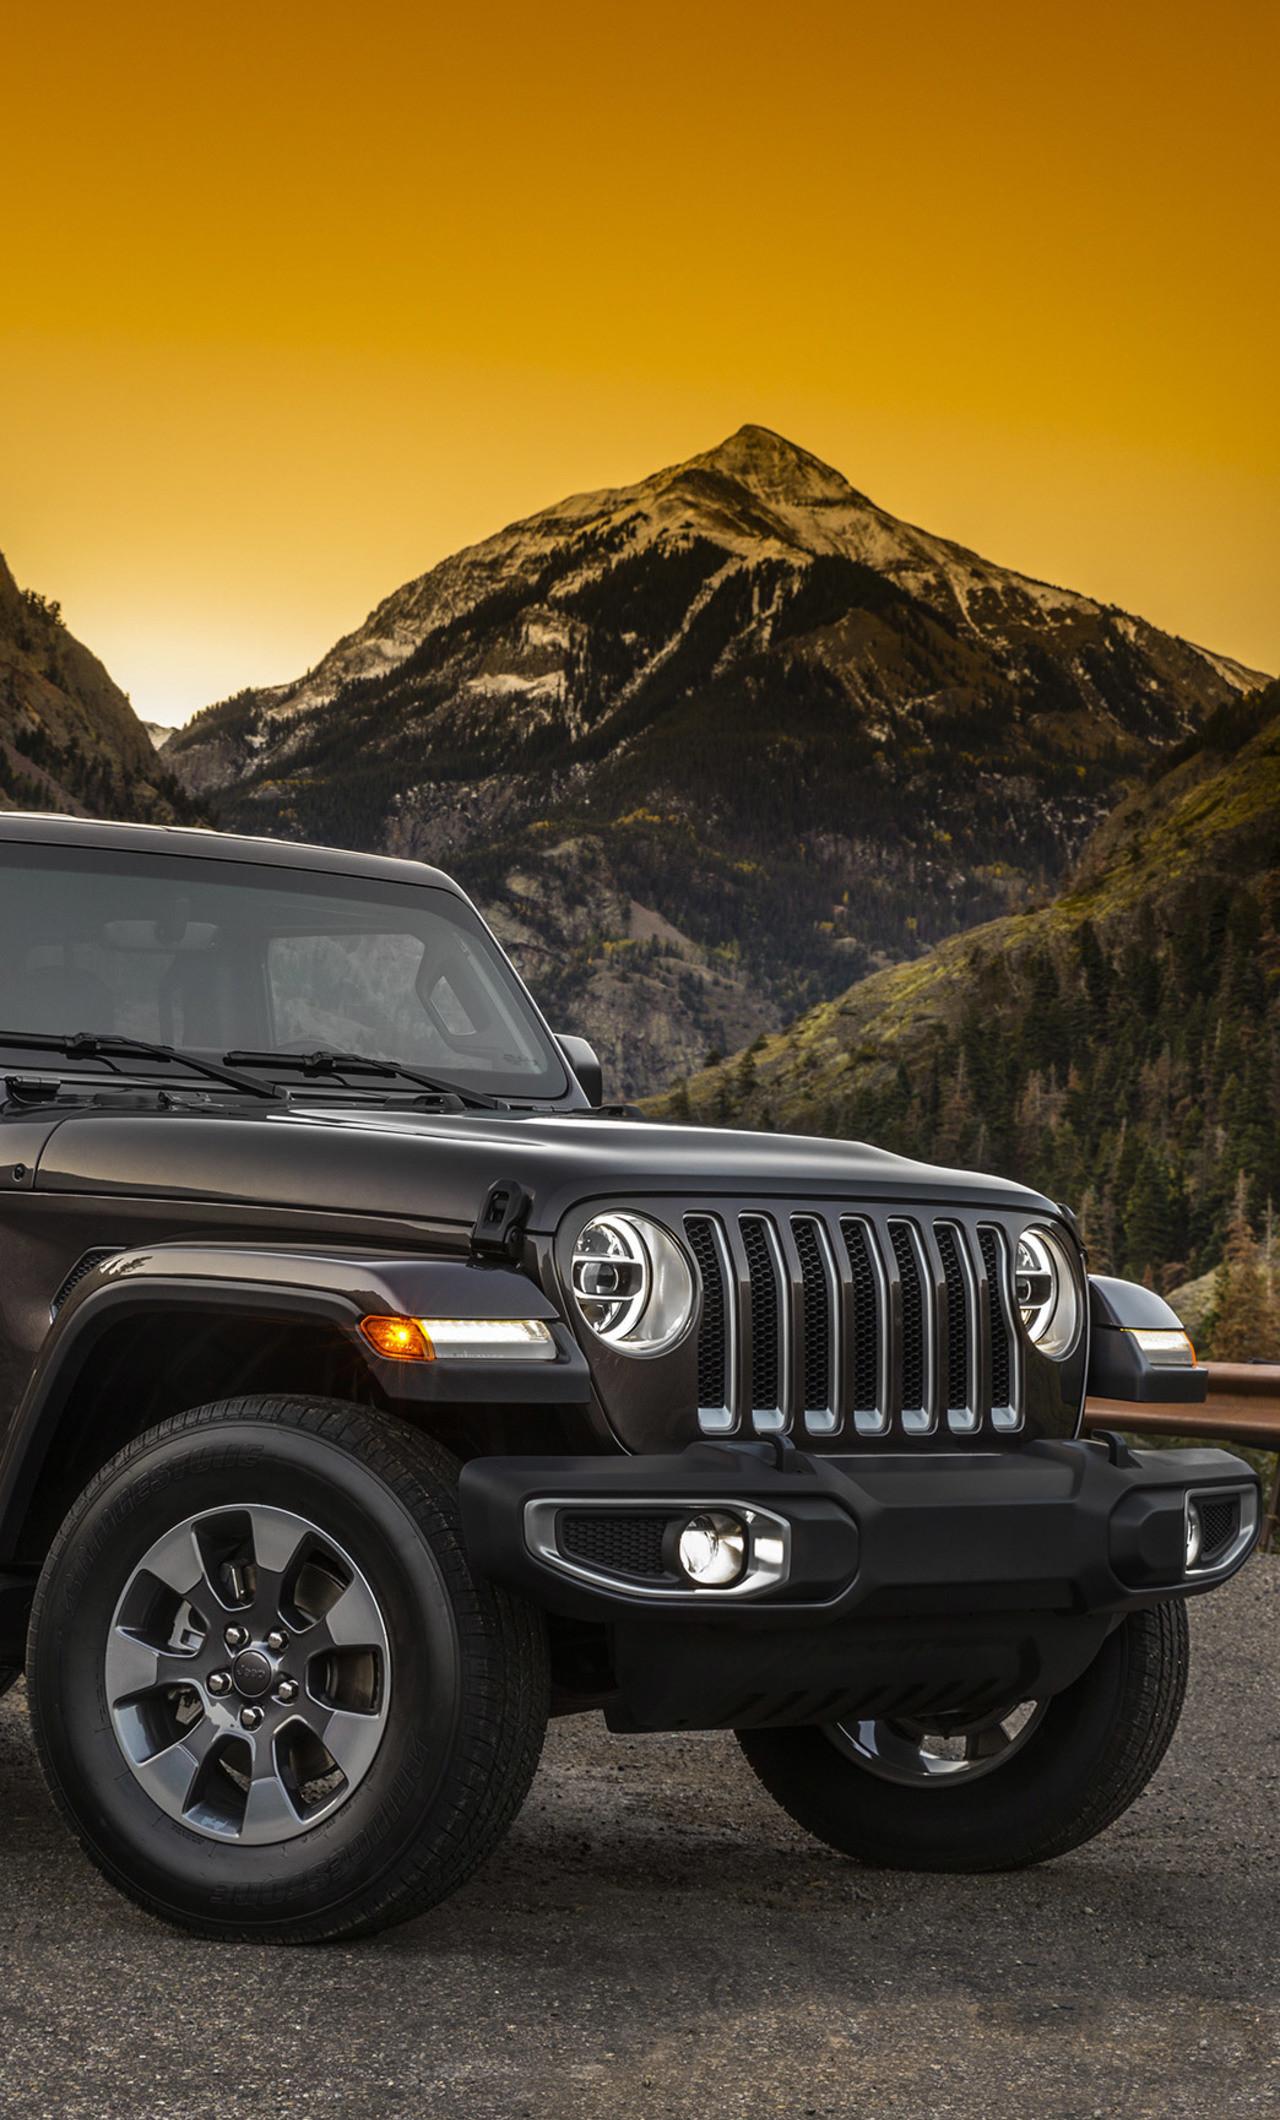 Jeep Wrangler Android Wallpapers - Wallpaper Cave